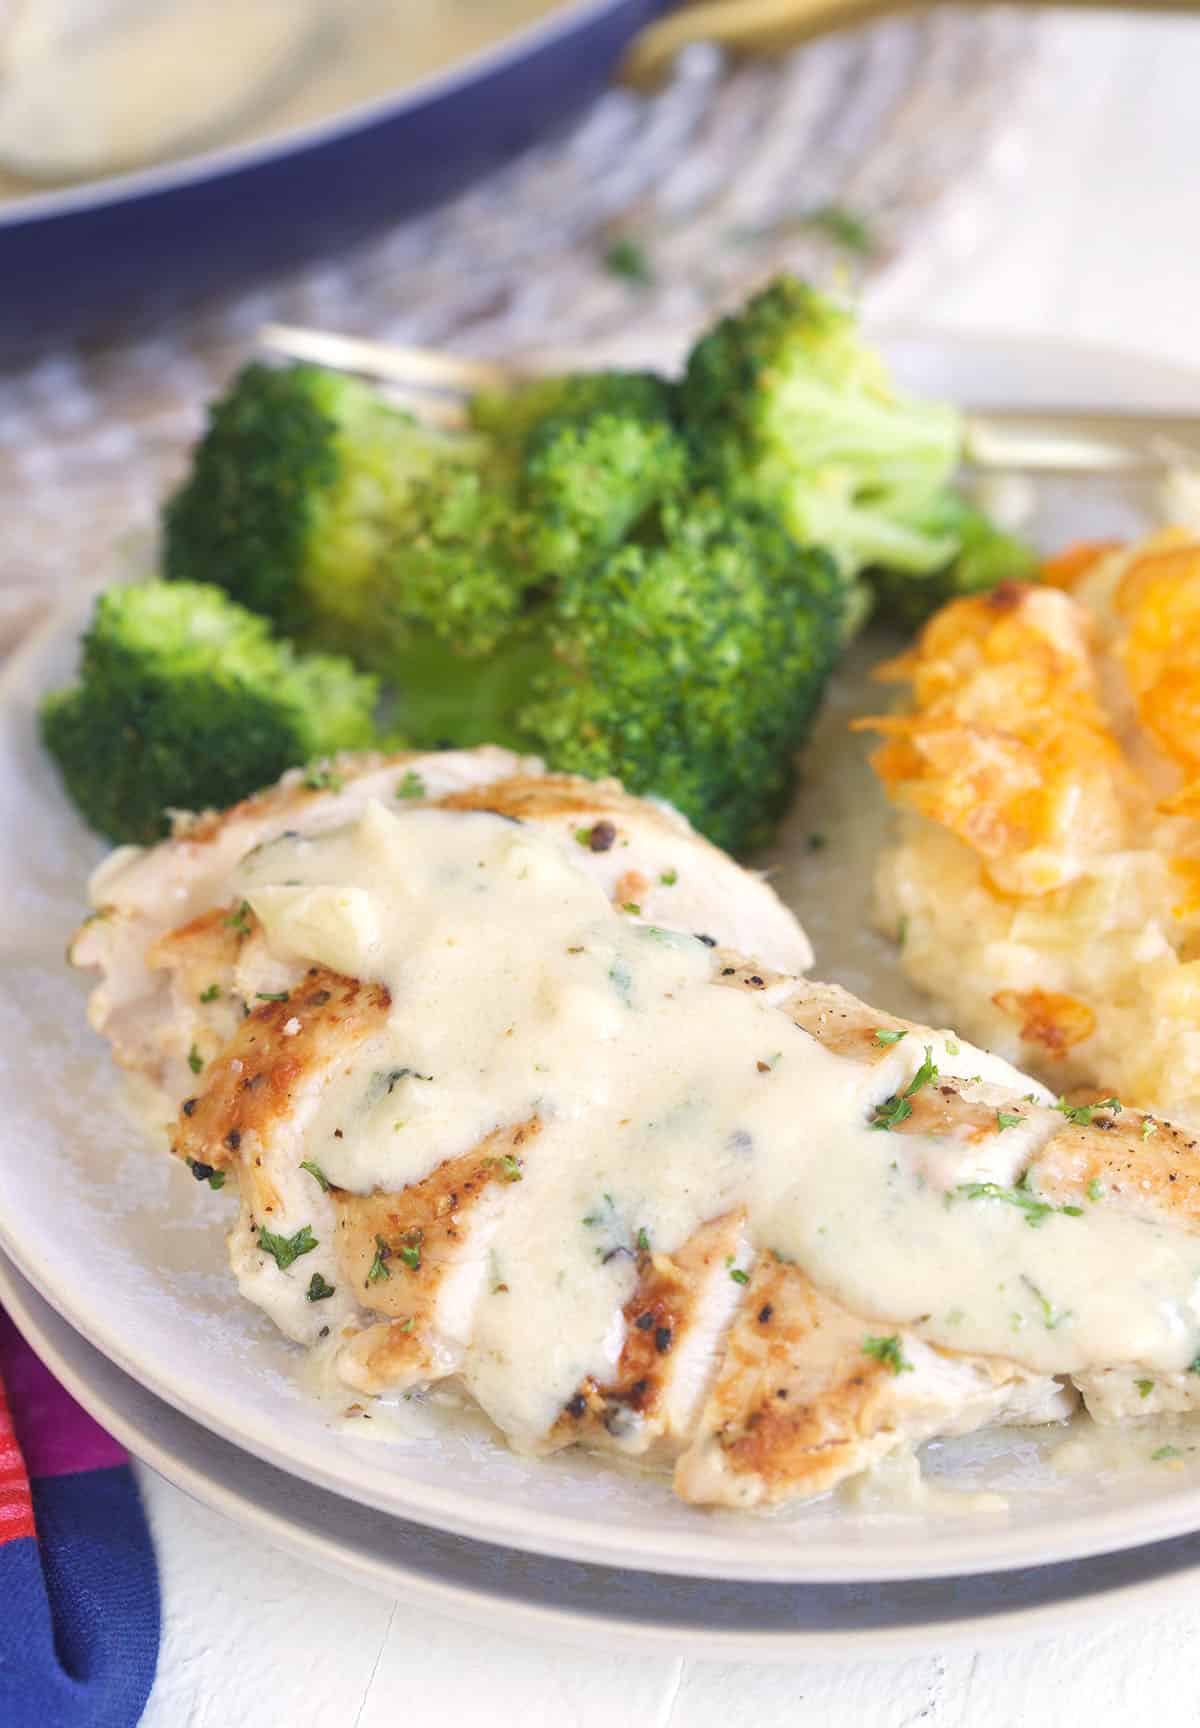 Broccoli and potatoes are placed next to a sauce covered chicken breast on a plate.